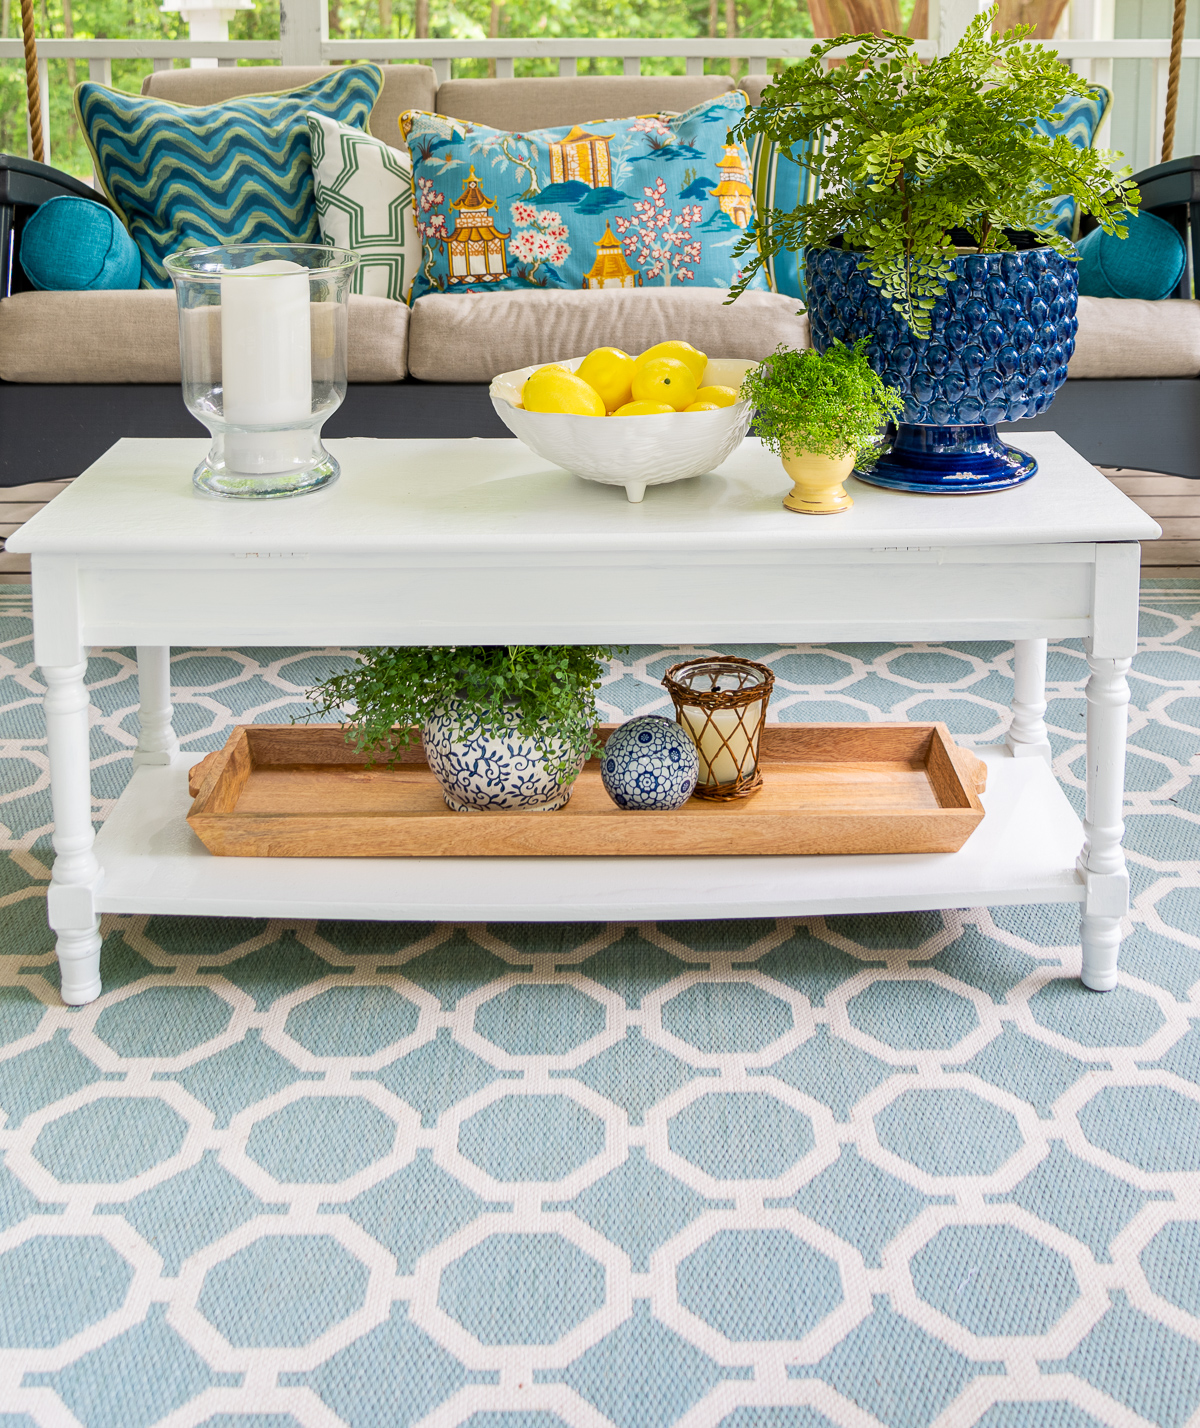 painted white coffee table with blue, white and yellow accessories on an aqua outdoor rug with a lattice pattern